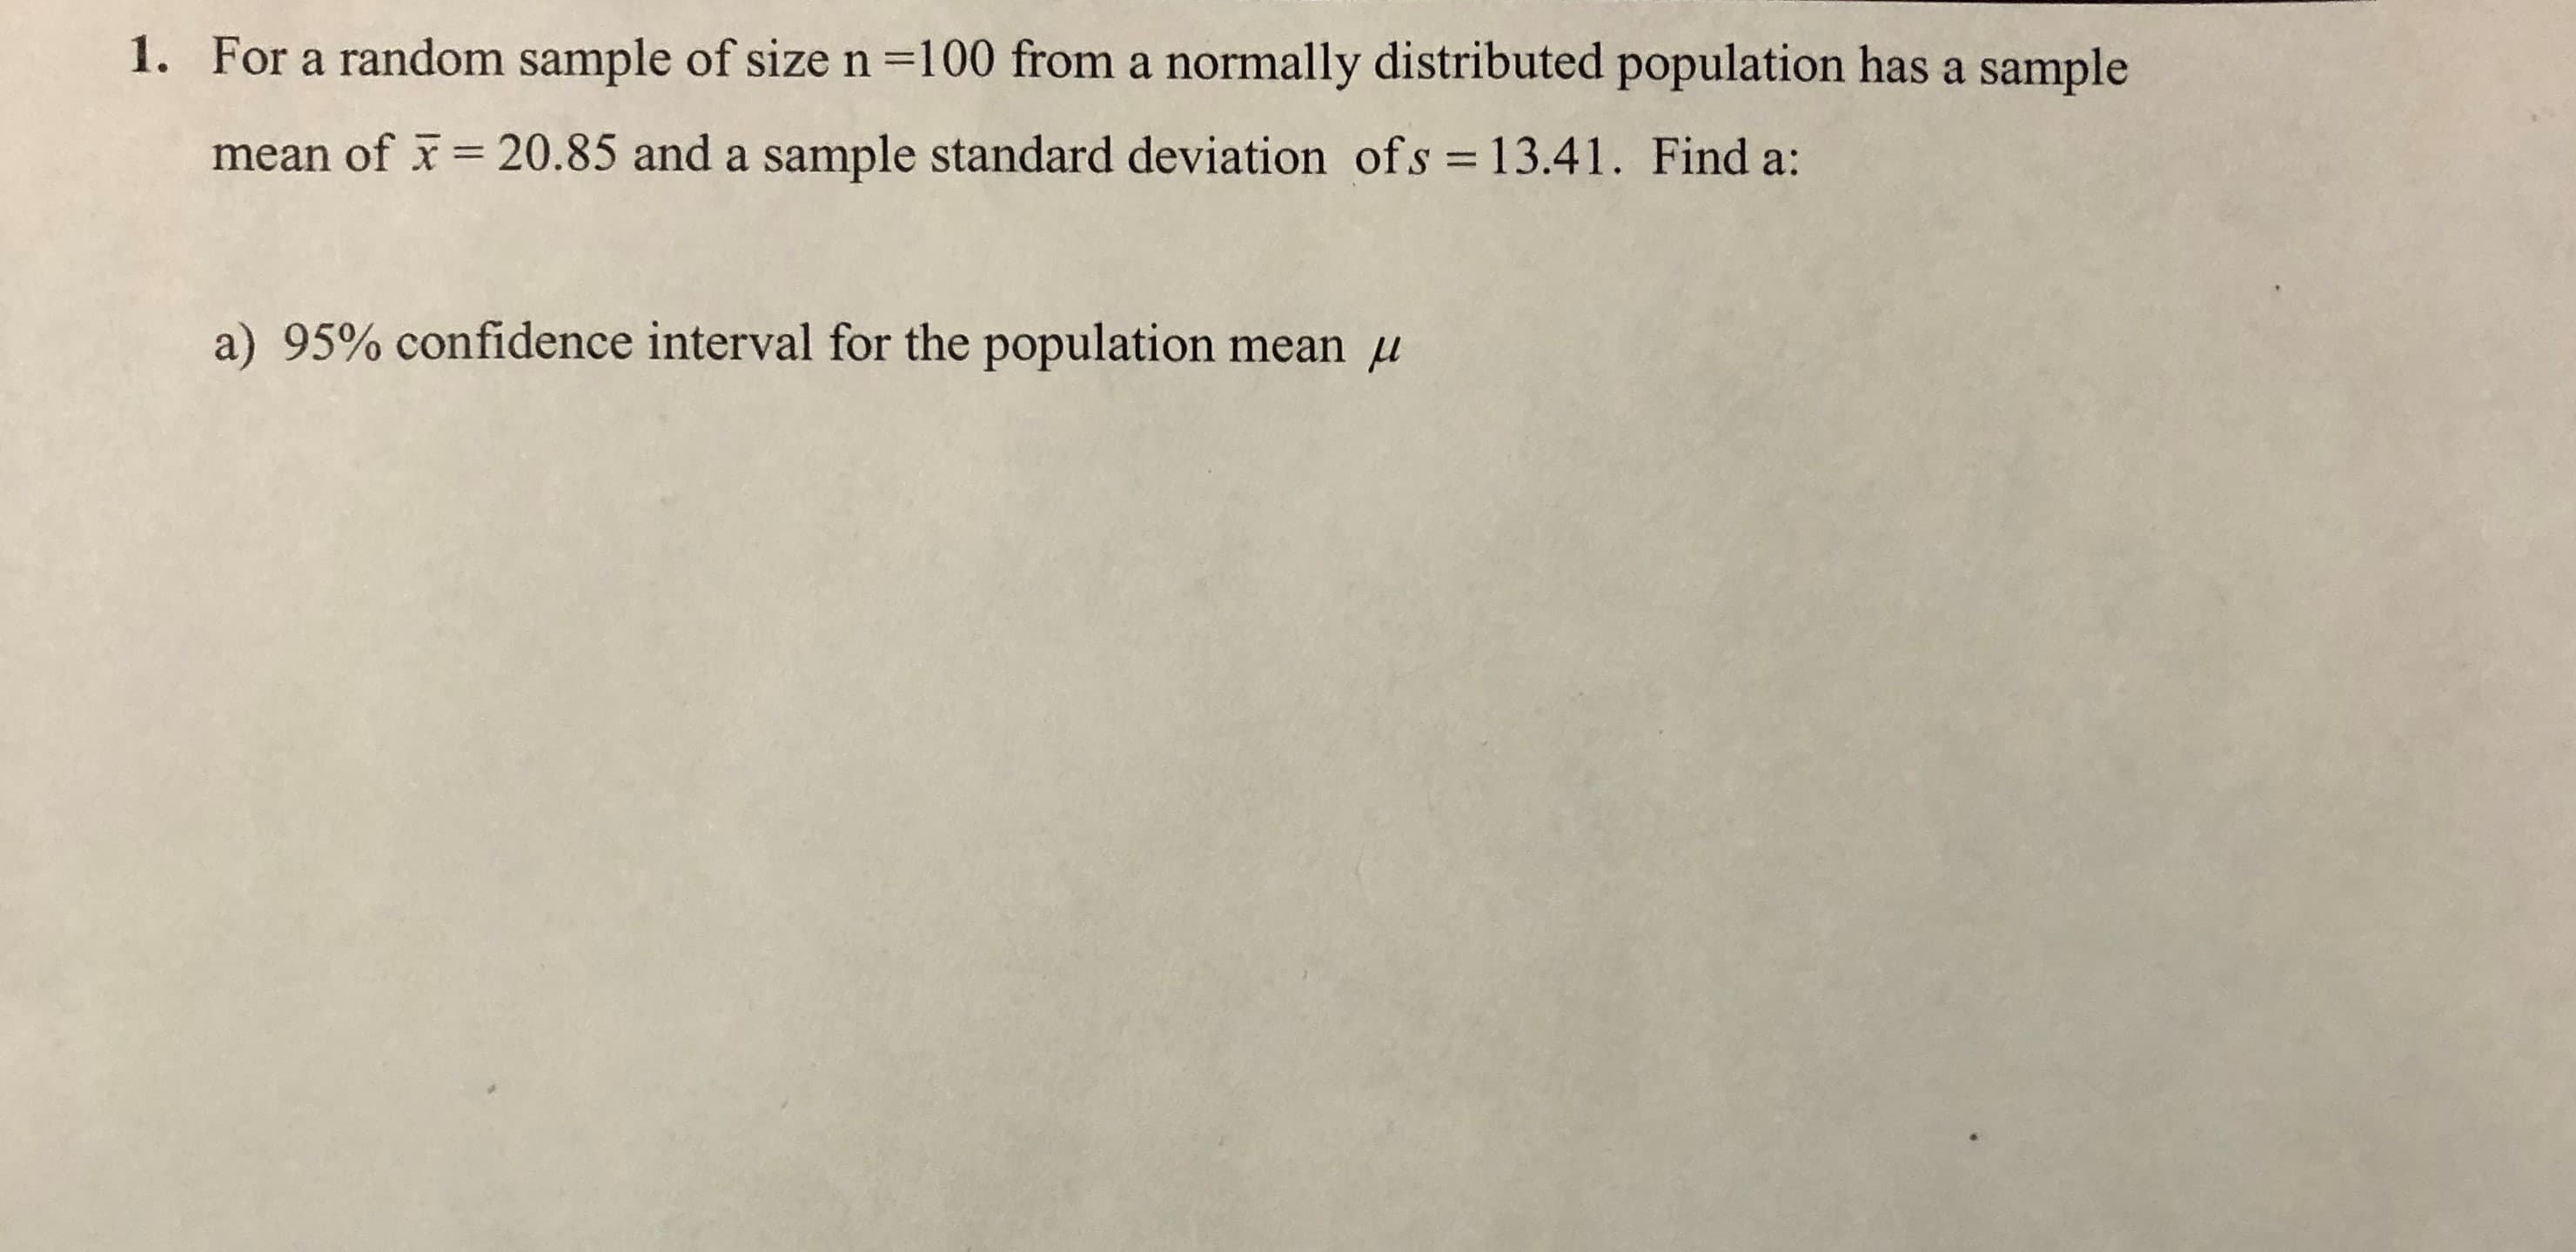 For a random sample of size n =100 from a normally distributed population has a sample
1.
mean of
= 20.85 and a sample standard deviation ofs = 13.41. Find a:
%3D
a) 95% confidence interval for the population mean u
